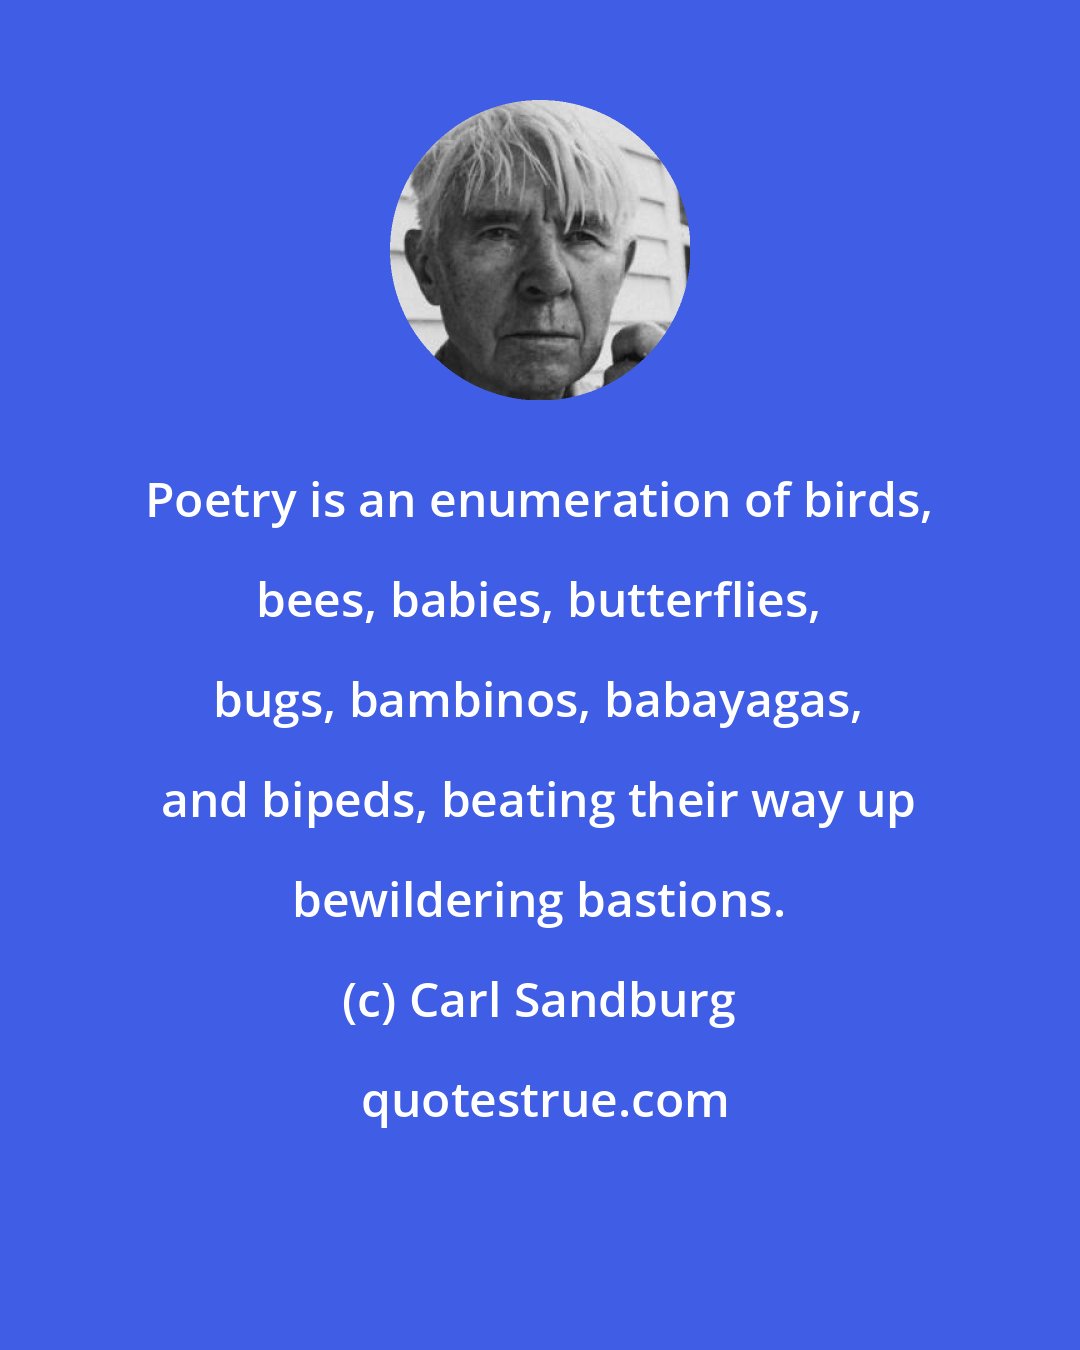 Carl Sandburg: Poetry is an enumeration of birds, bees, babies, butterflies, bugs, bambinos, babayagas, and bipeds, beating their way up bewildering bastions.